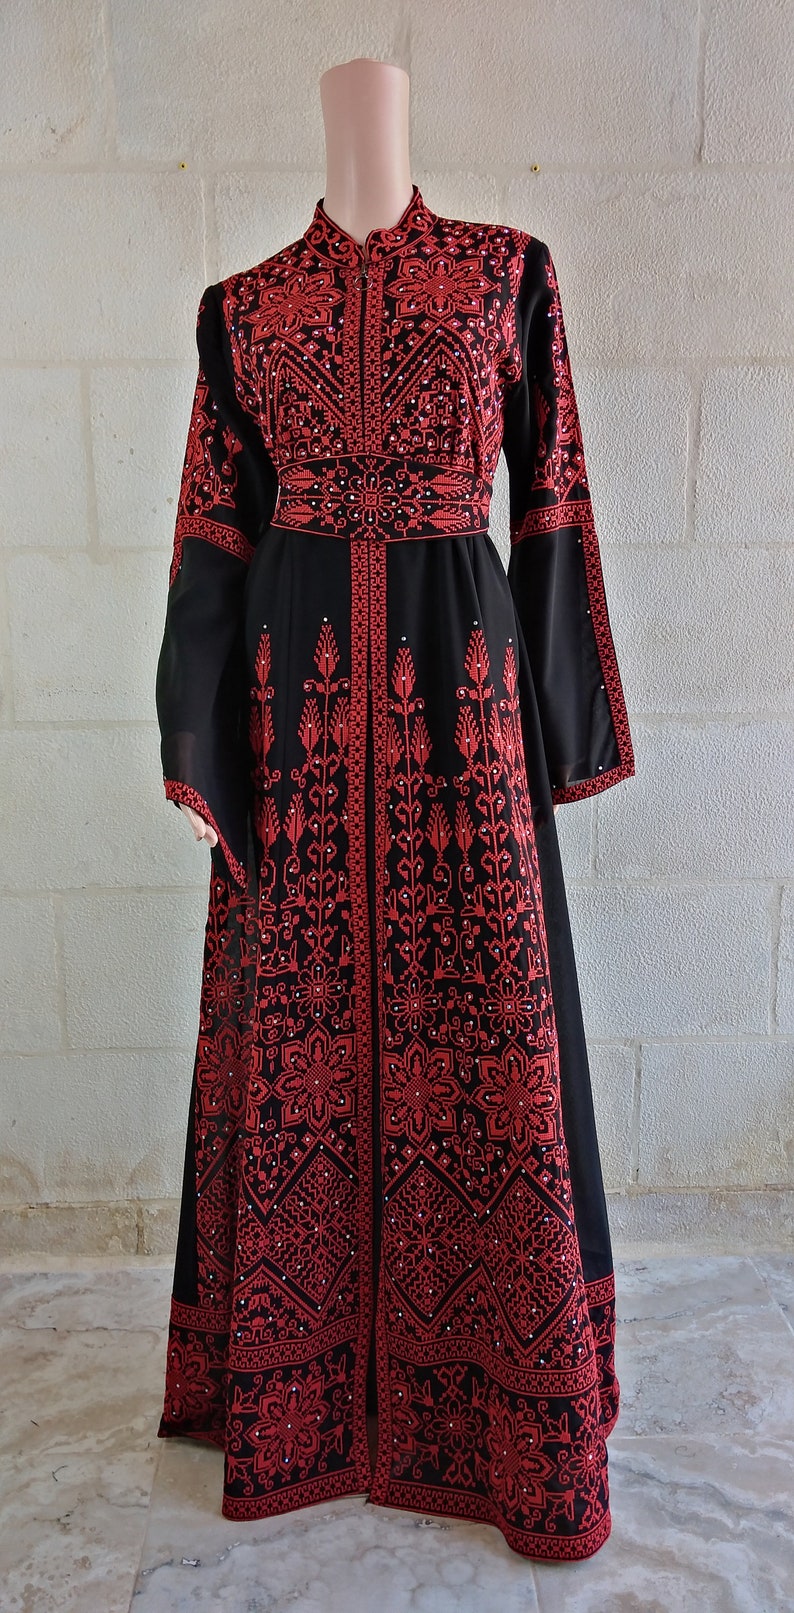 Palestinian Thobe Embroidery Maxi Dress Black and Red Sunbola image 6